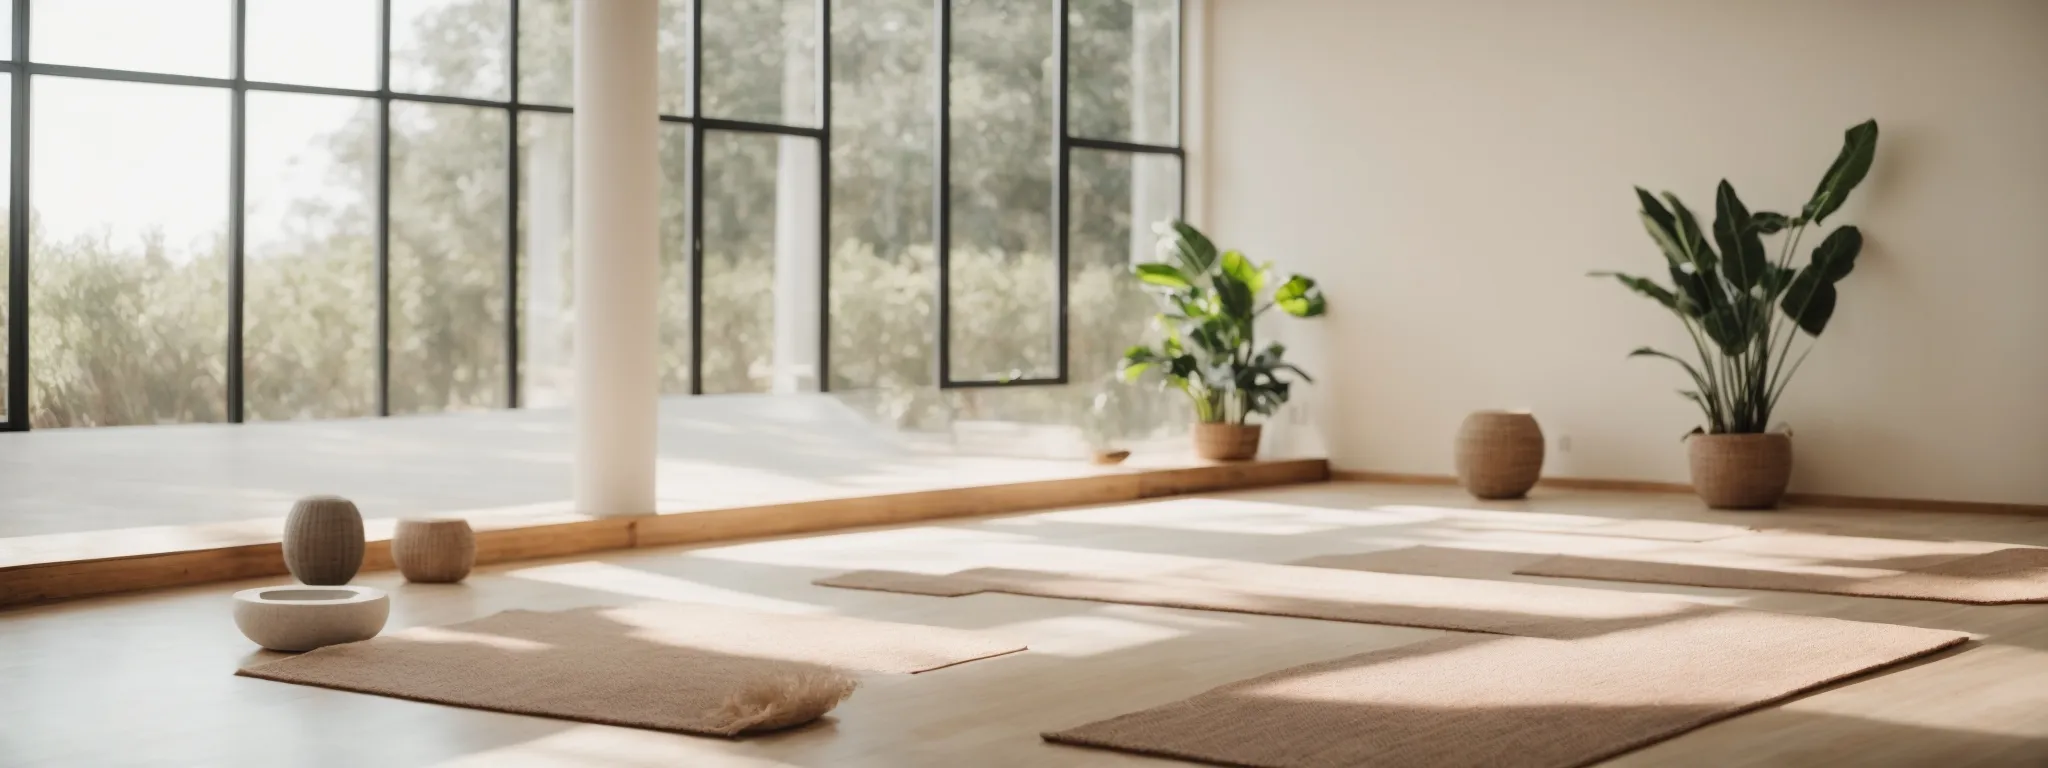 a serene yoga studio filled with natural light and minimalist decor, inviting calm and focus.